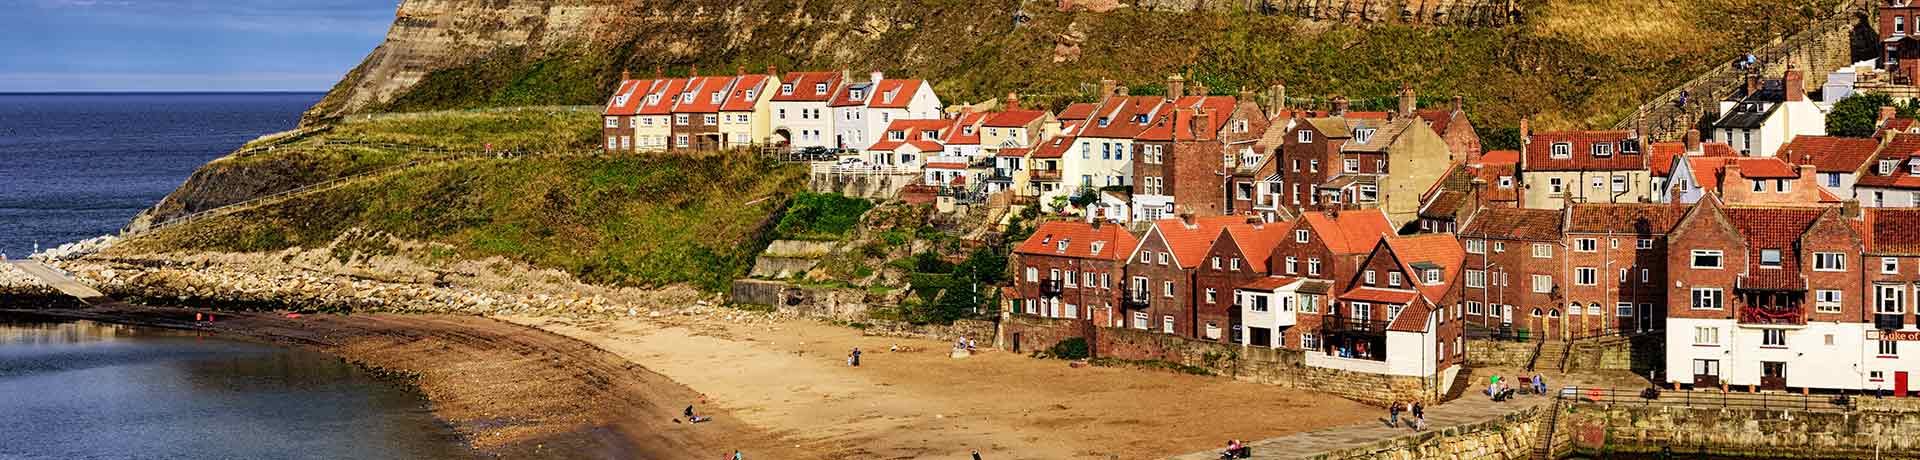 Cottages in Whitby